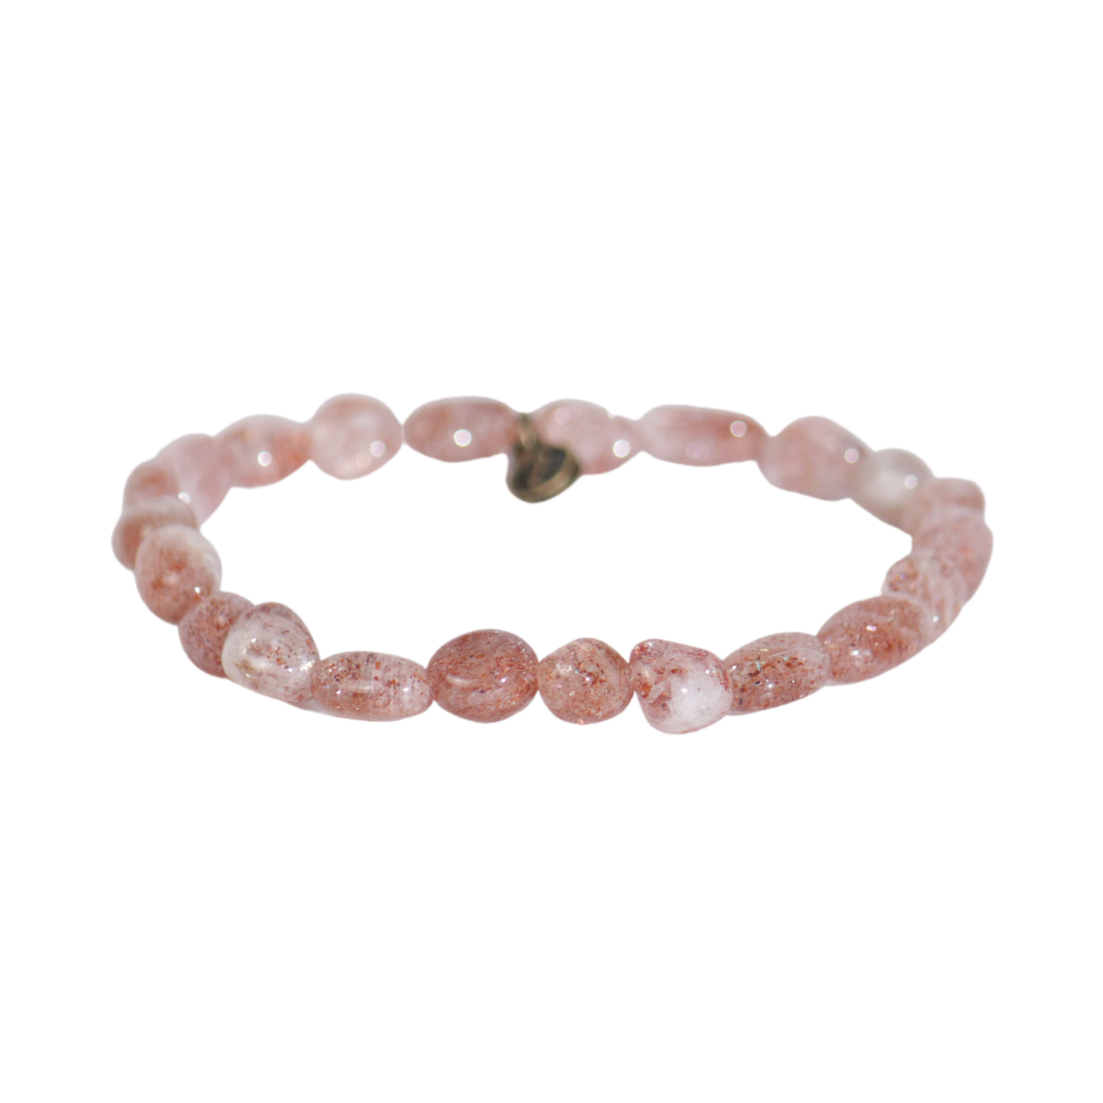 product view of genuine Sunstone crystal bracelet by Energy Muse with irregular pebble beads and elastic stretch body.